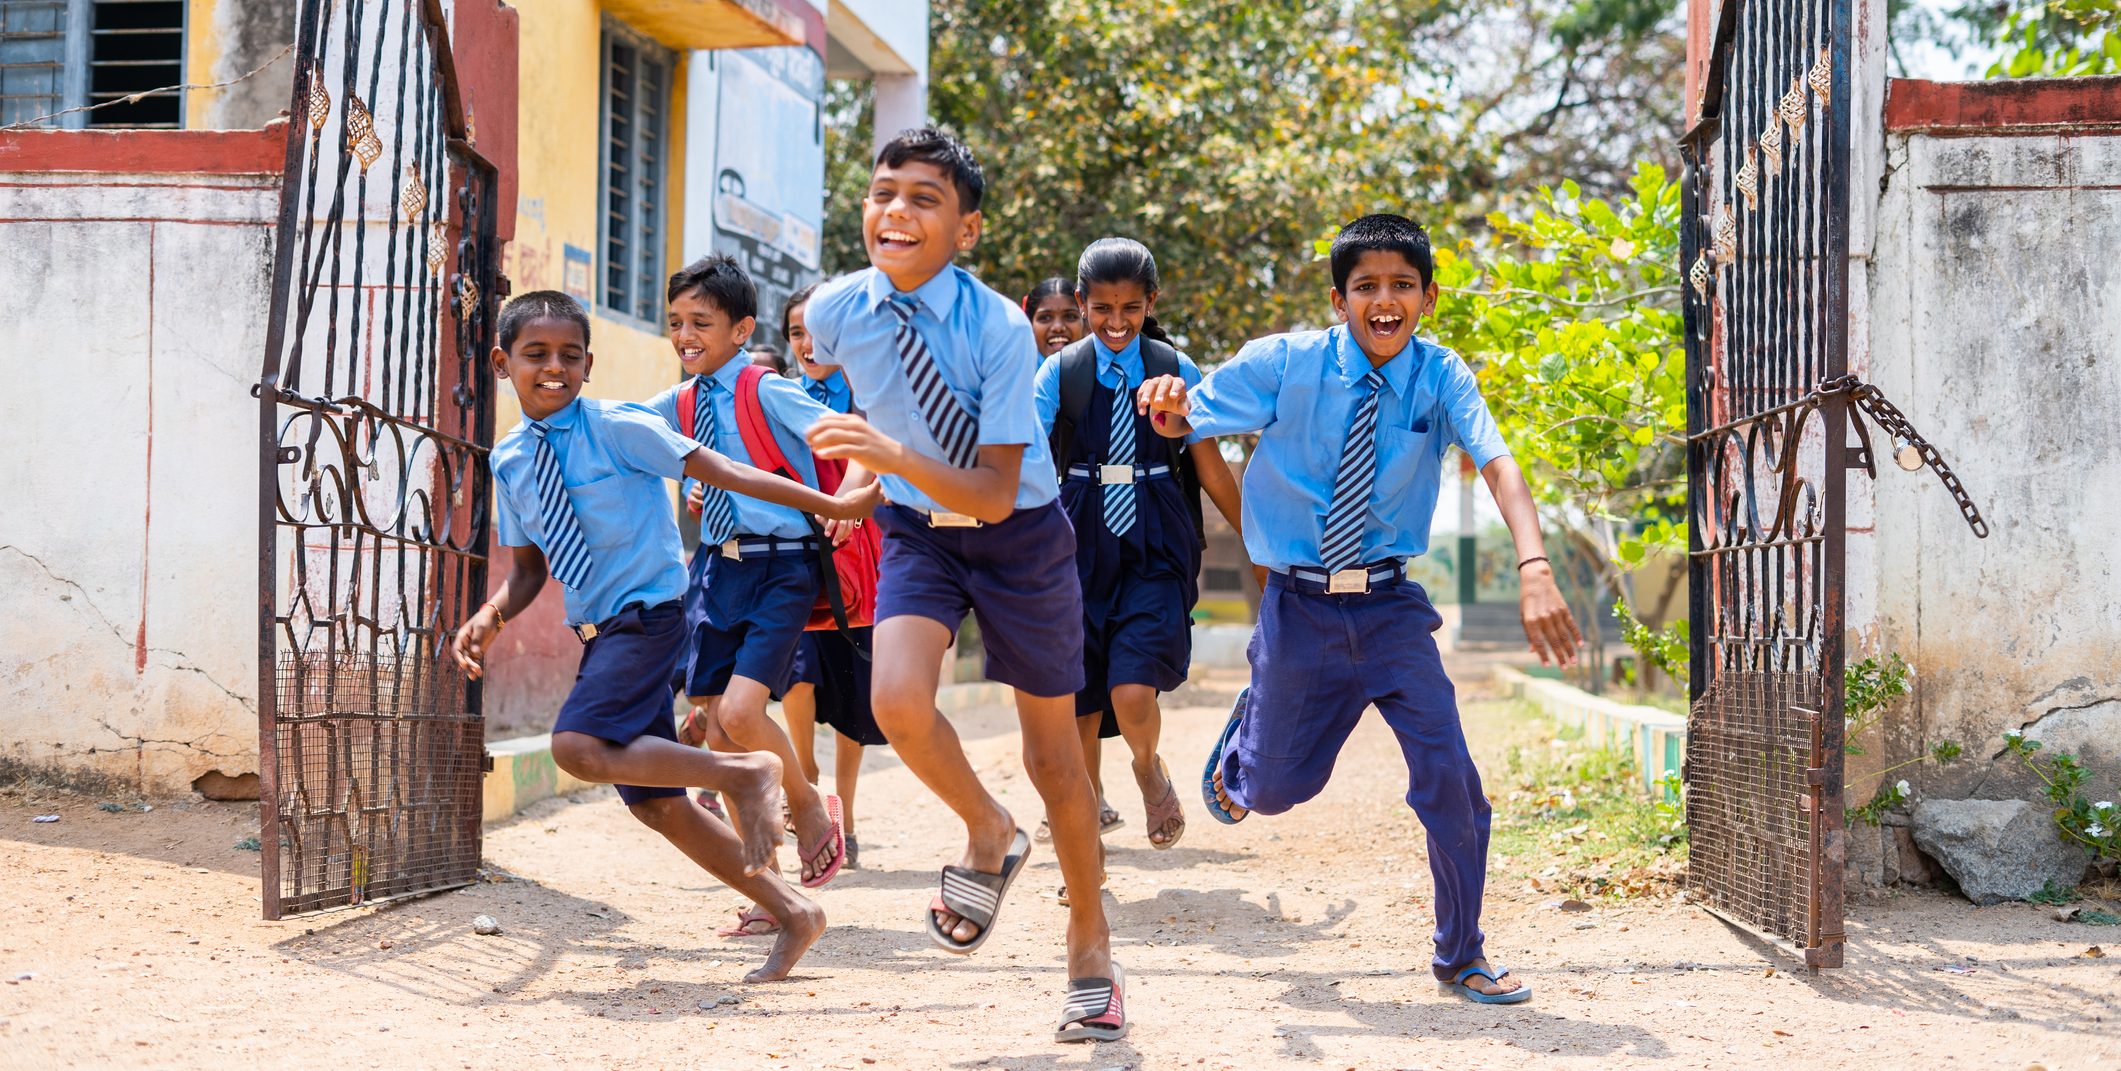 Children running out from school by opening gate after the bell - concept of education, freedom, happiness, enjoyment and childhood growth